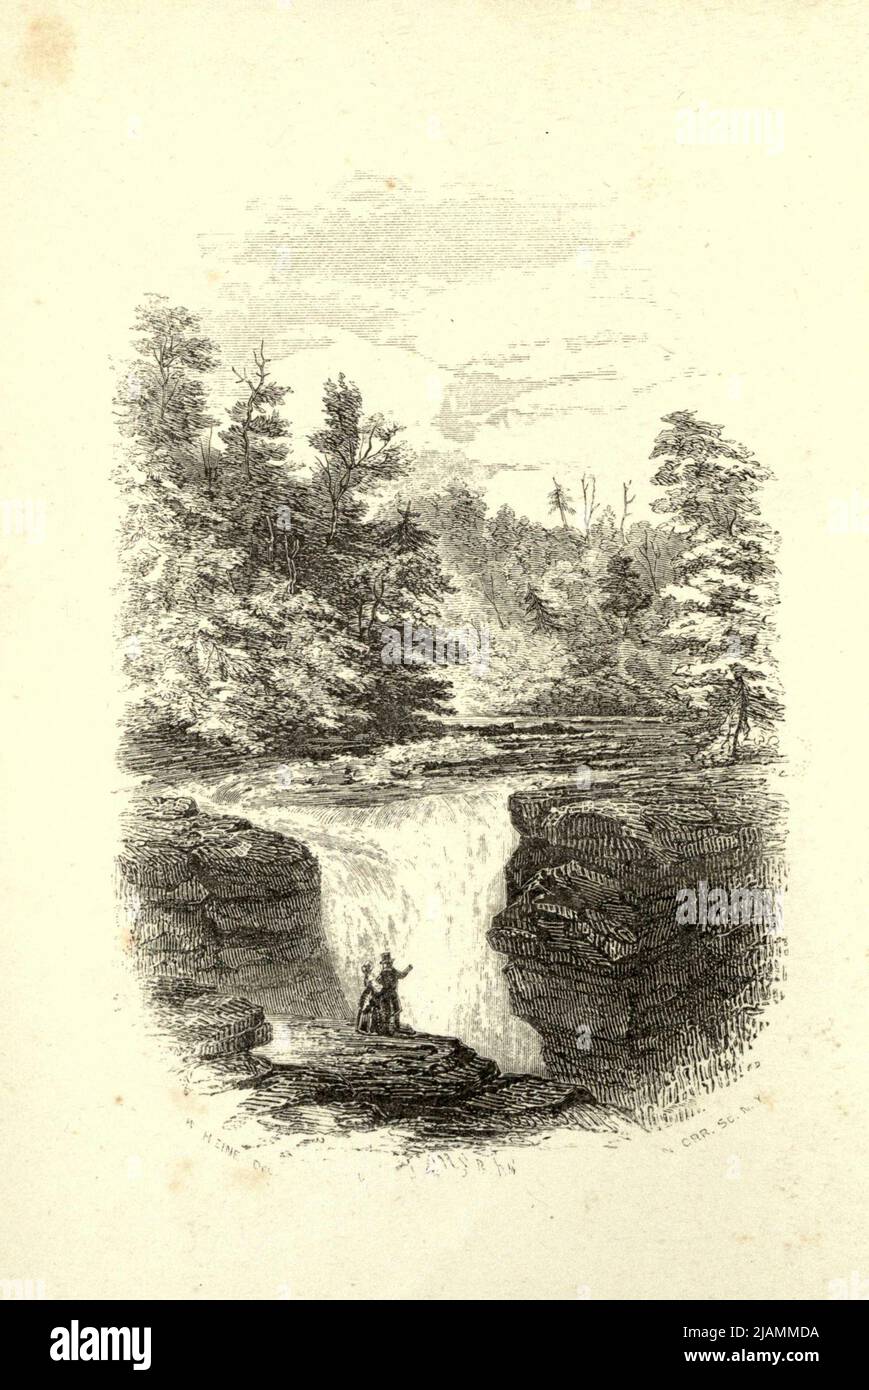 SHERMAN FALL Frontispiece. From the Book ' Trenton Falls, picturesque and descriptive ' by Nathaniel Parker Willis, John Sherman, ILLUSTRATIONS FROM ORIGINAL DESIGNS BY HEINE, KUMMER AND MULLER Publication date 1851 Publisher New York : G.P. Putnam [Trenton Falls is a waterfall on West Canada Creek in Trenton, New York. Scenic trails were developed by Brookfield Renewable Power and the Town of Trenton. The falls was and used to produce hydro generated electricity beginning in the early twentieth century, and continues to do so today.] Stock Photo